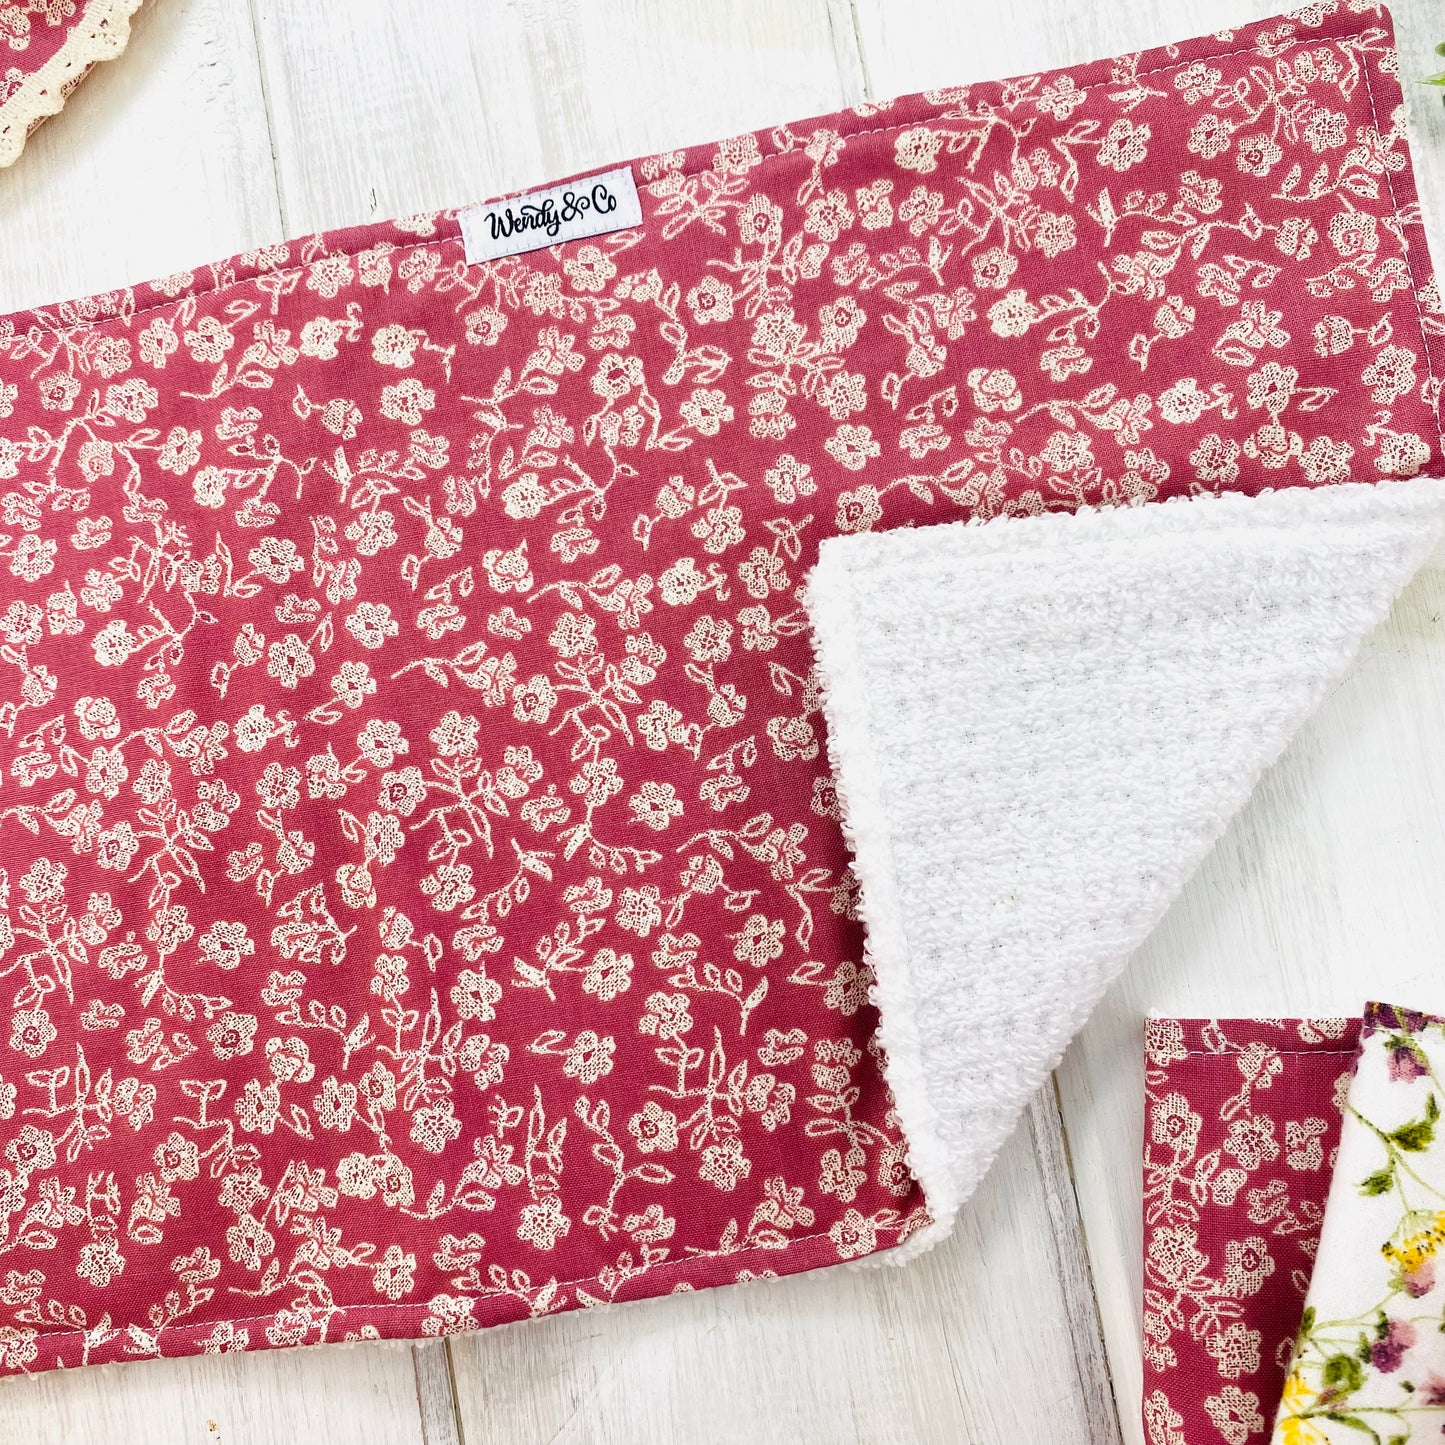 Floral burp cloth, great gift for baby girl.